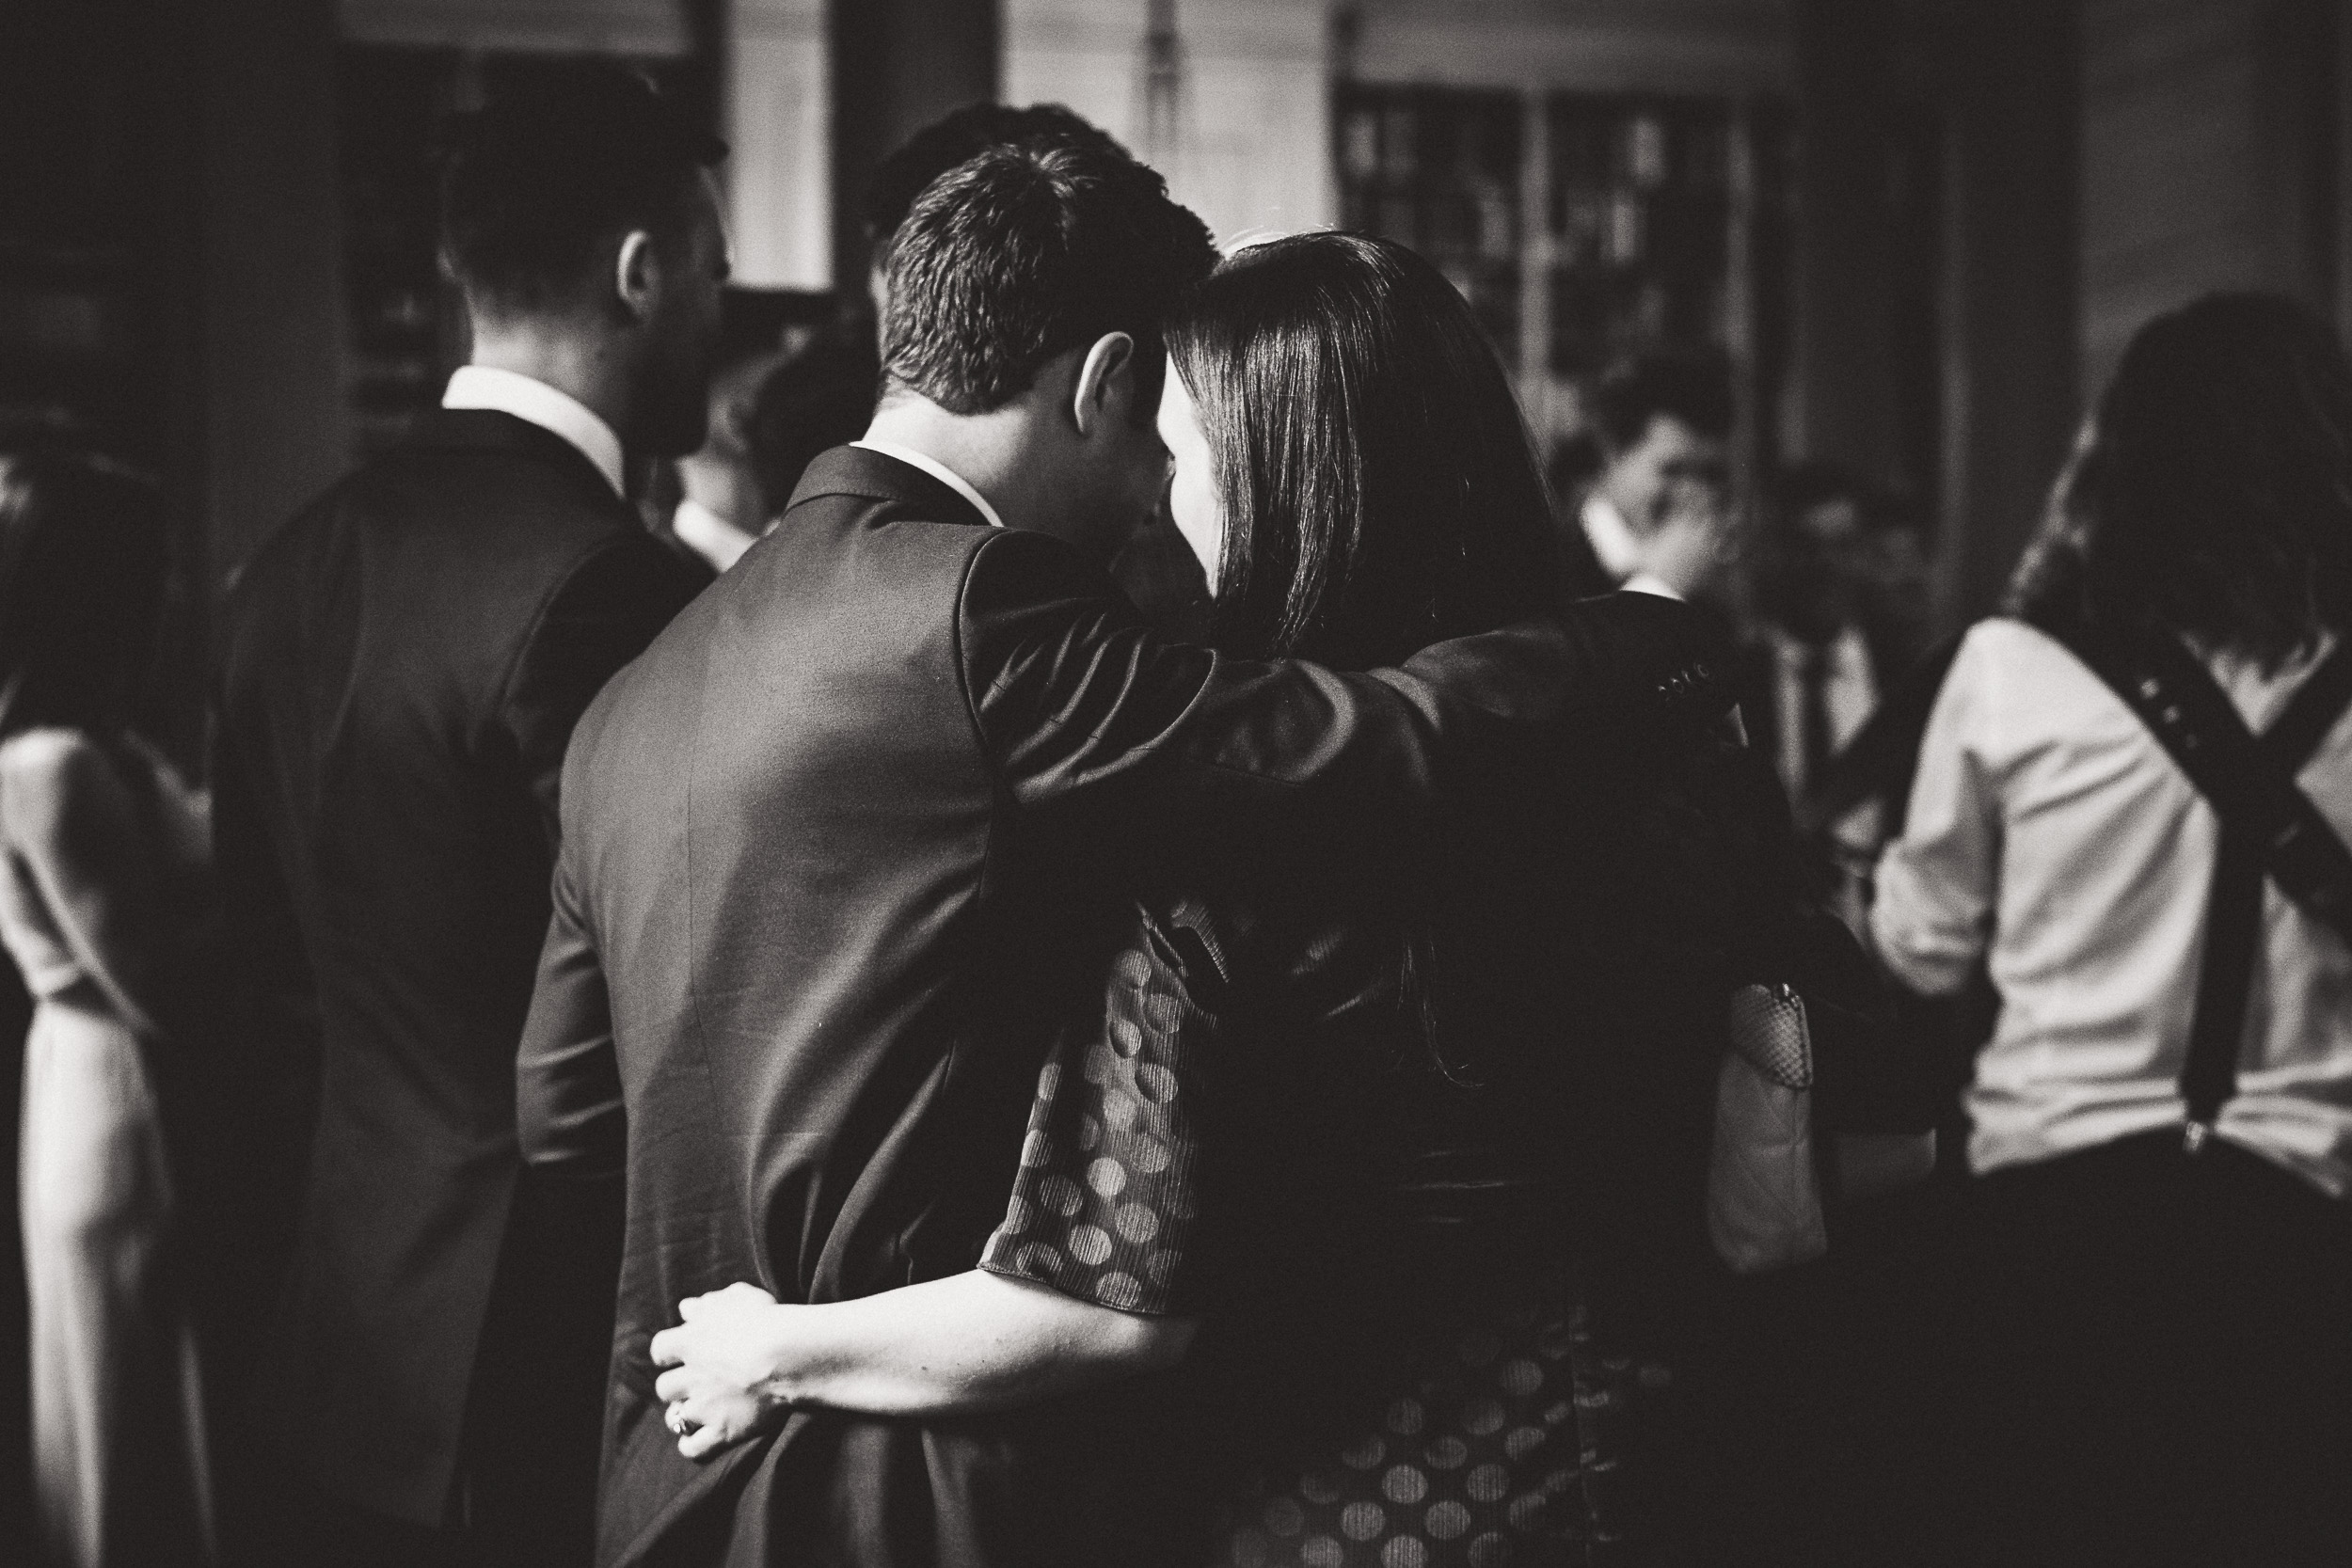 A black and white wedding photo capturing a bride and groom hugging.